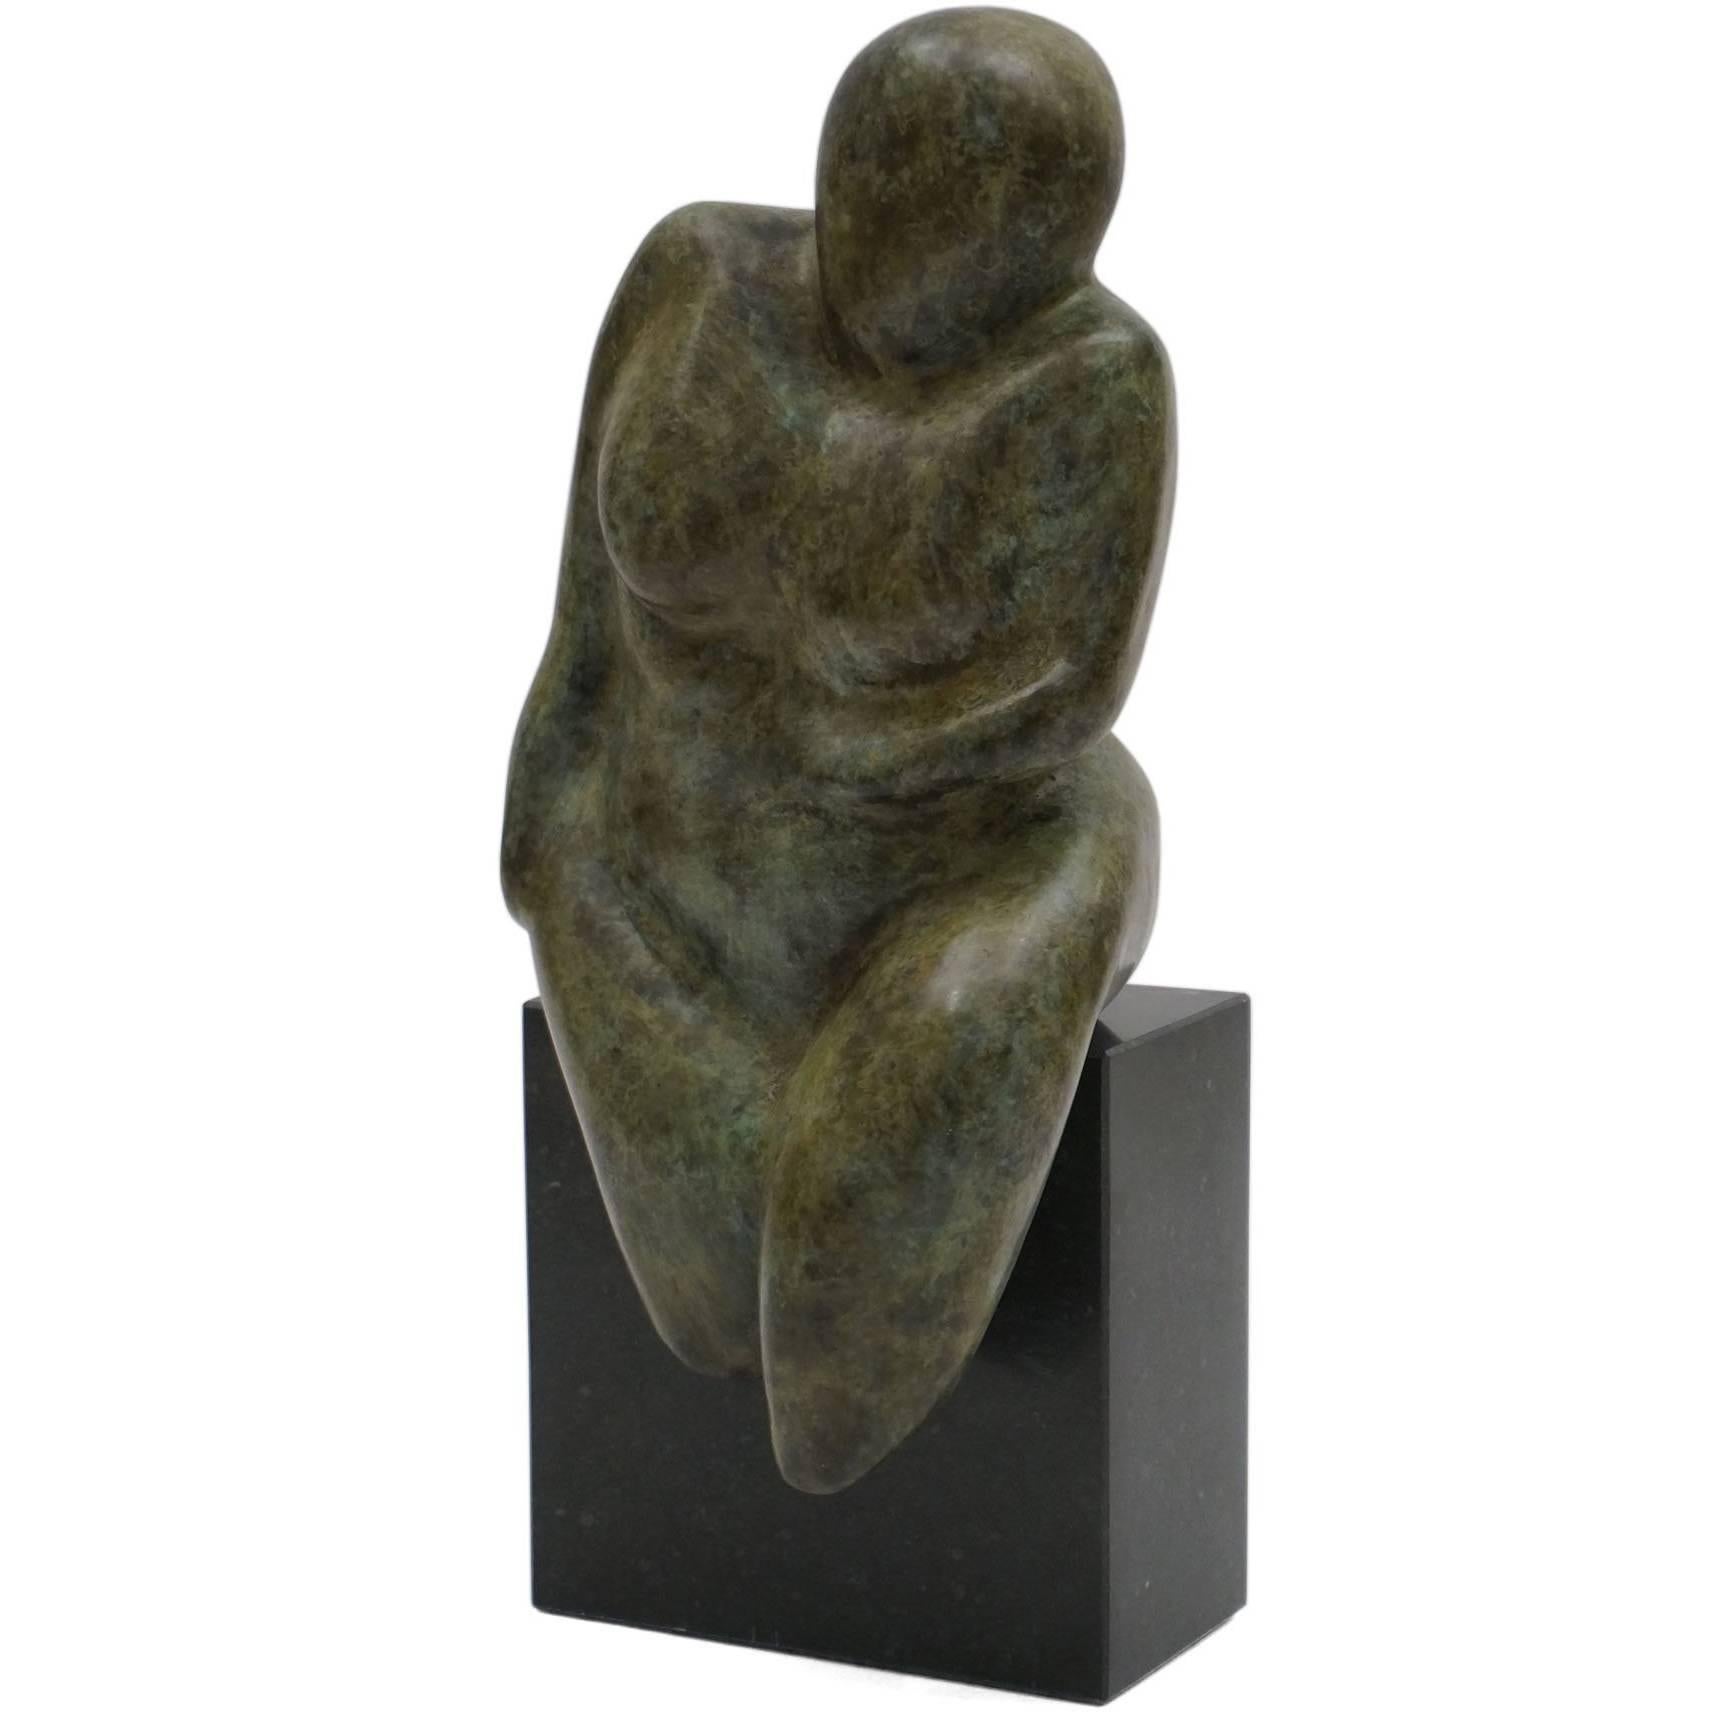 Seated Solid Bronze Female Nude Sculpture on Stone Cube Base